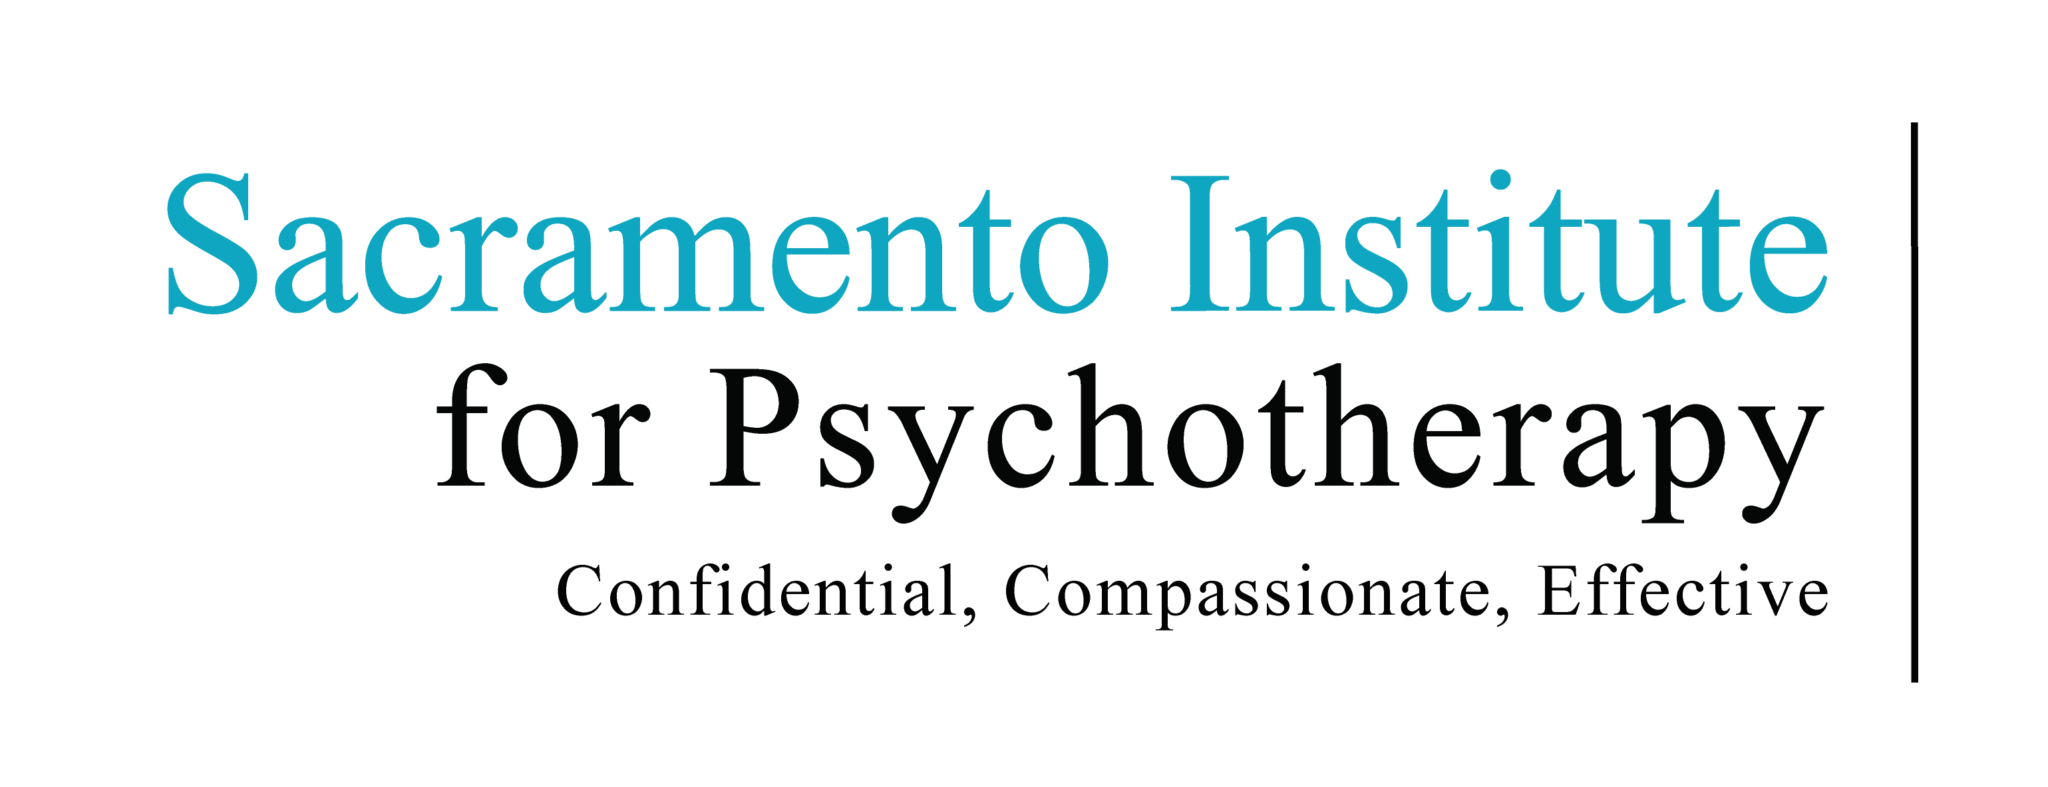 The Sacramento Institute for Psychotherapy